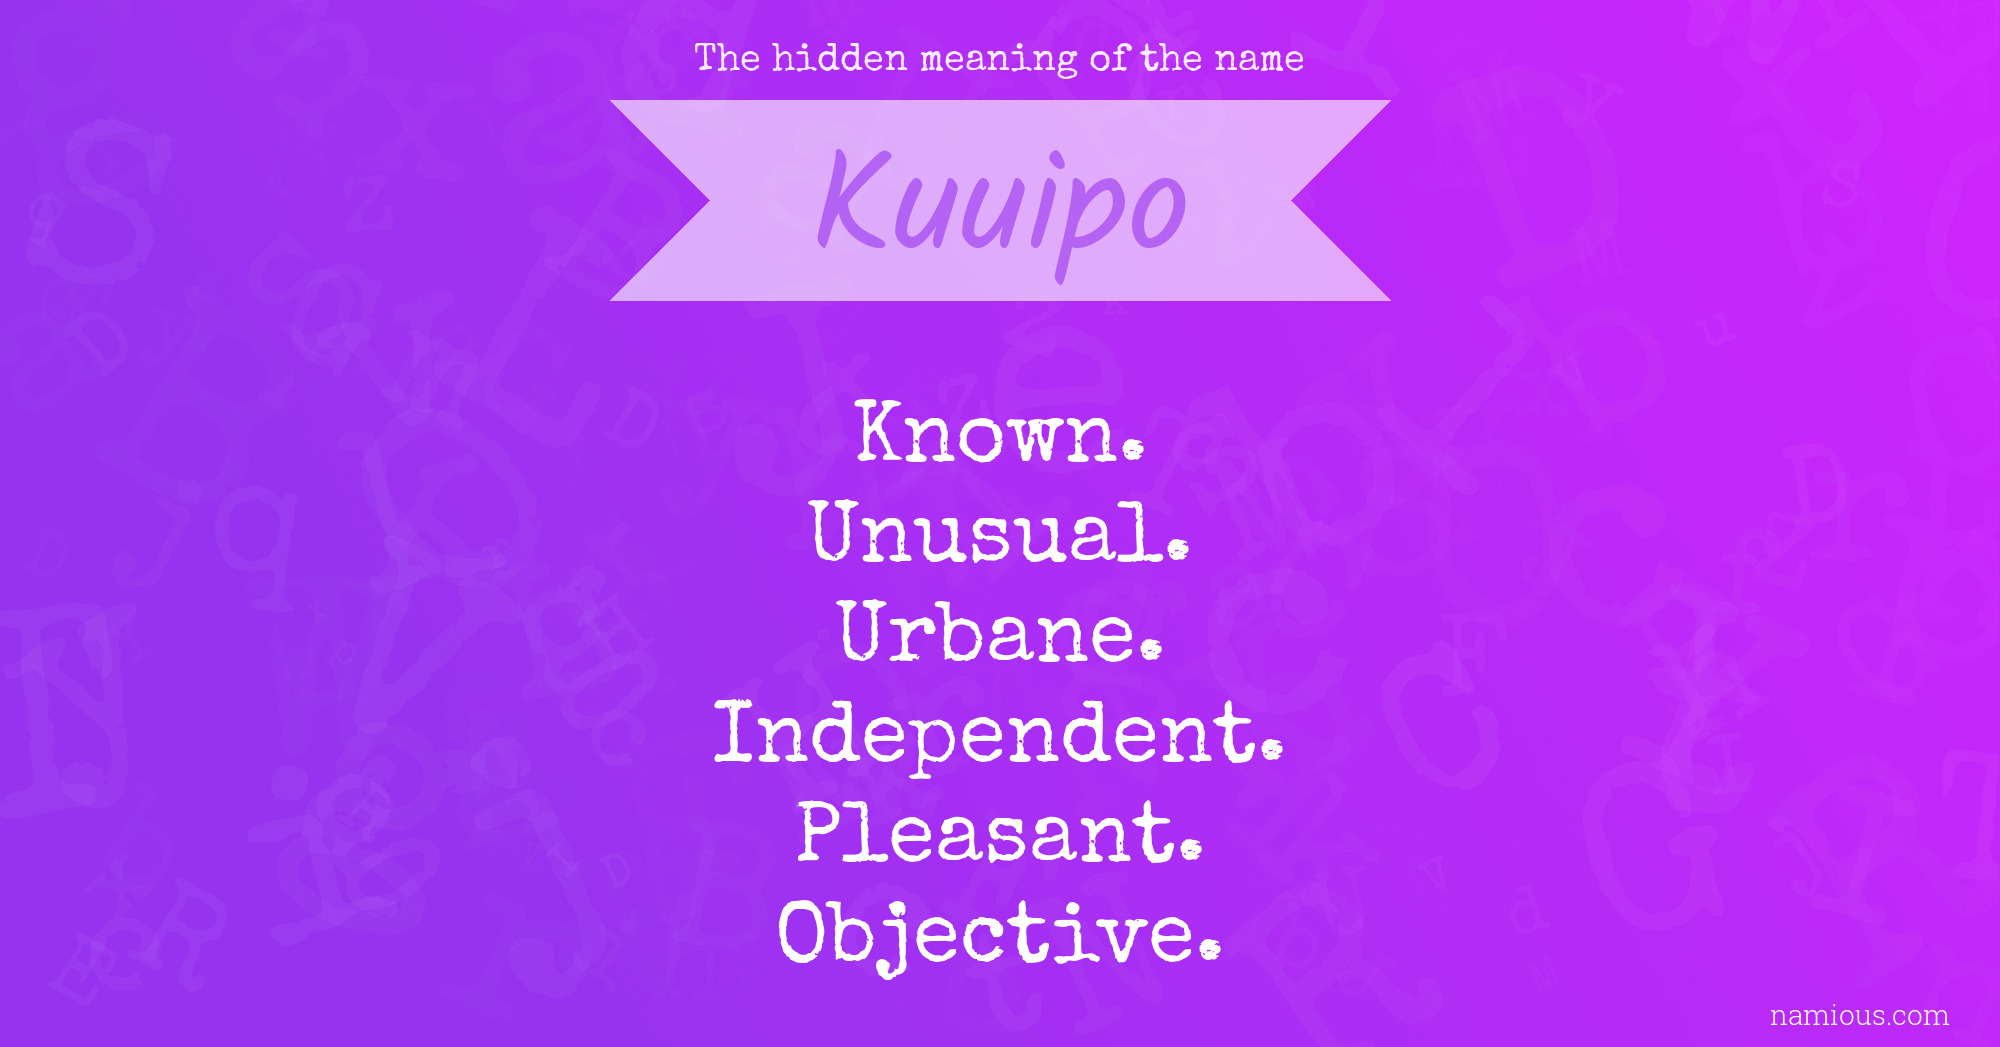 The hidden meaning of the name Kuuipo